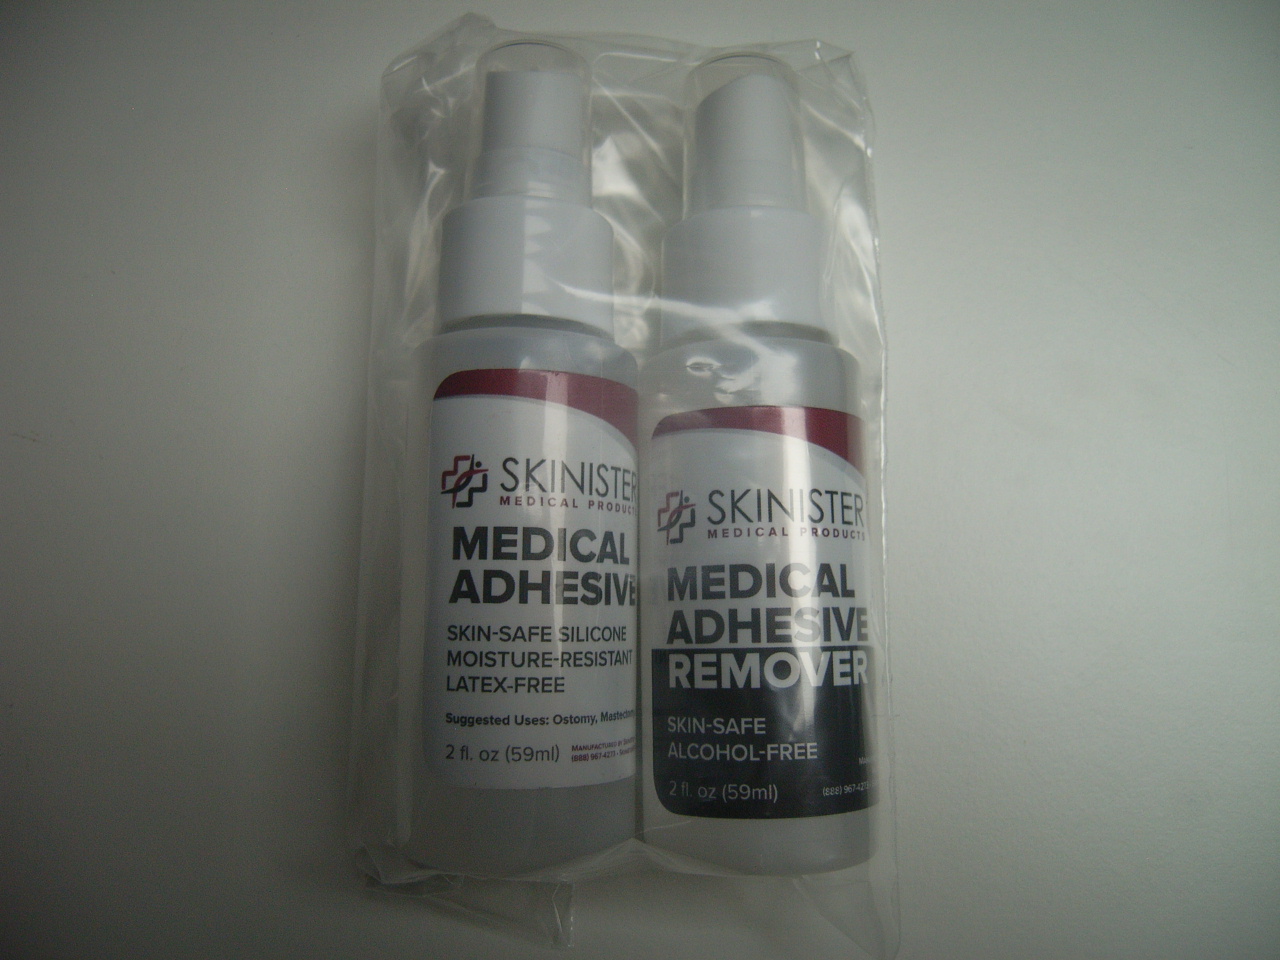 Skinister medical adhesive und remover im Set